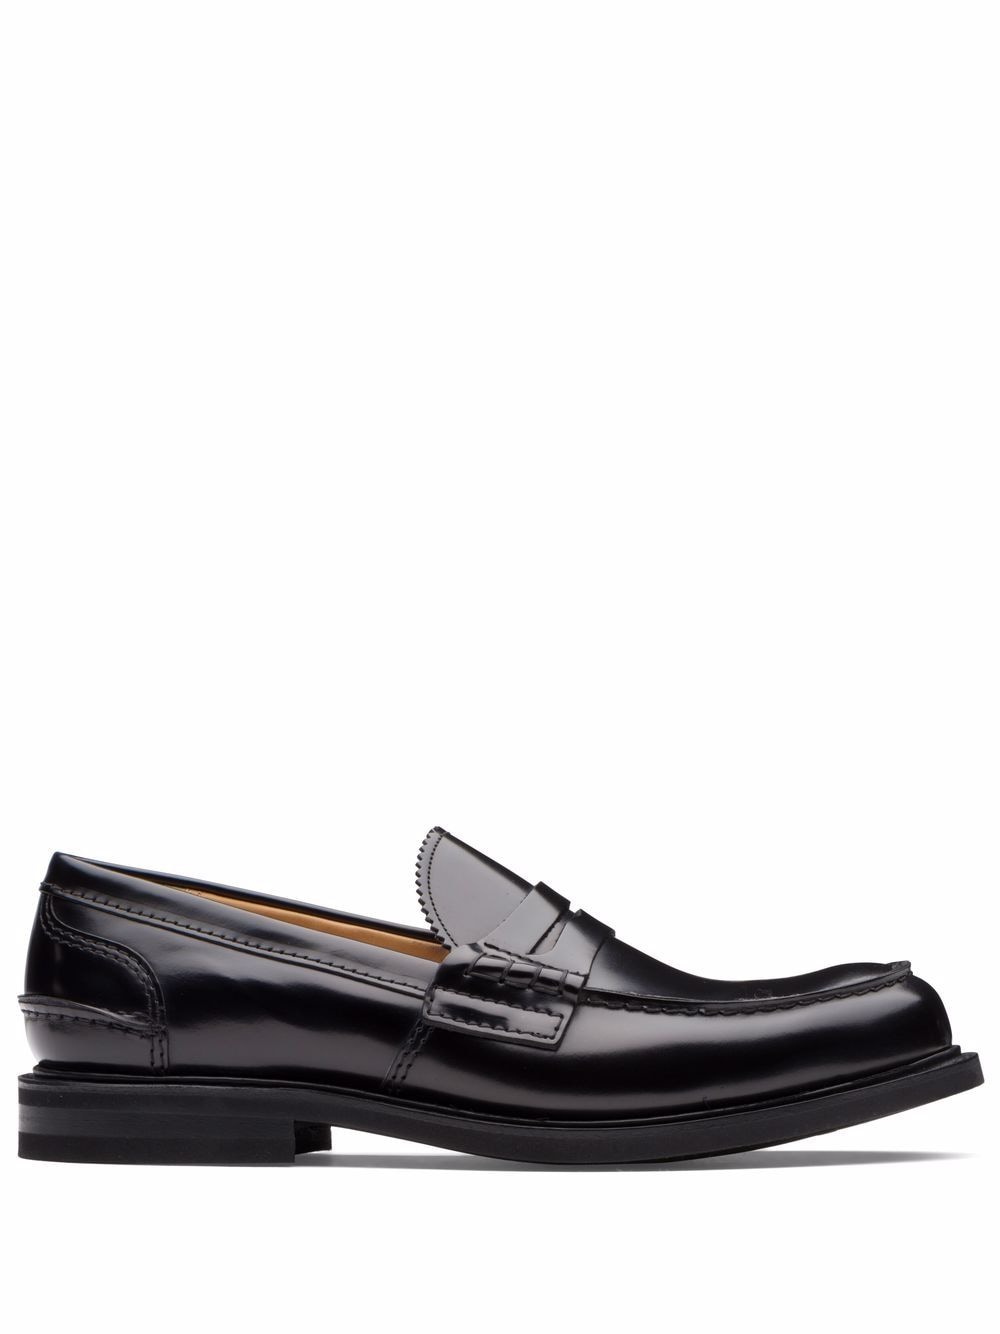 Image 1 of Church's Pembrey polished loafers